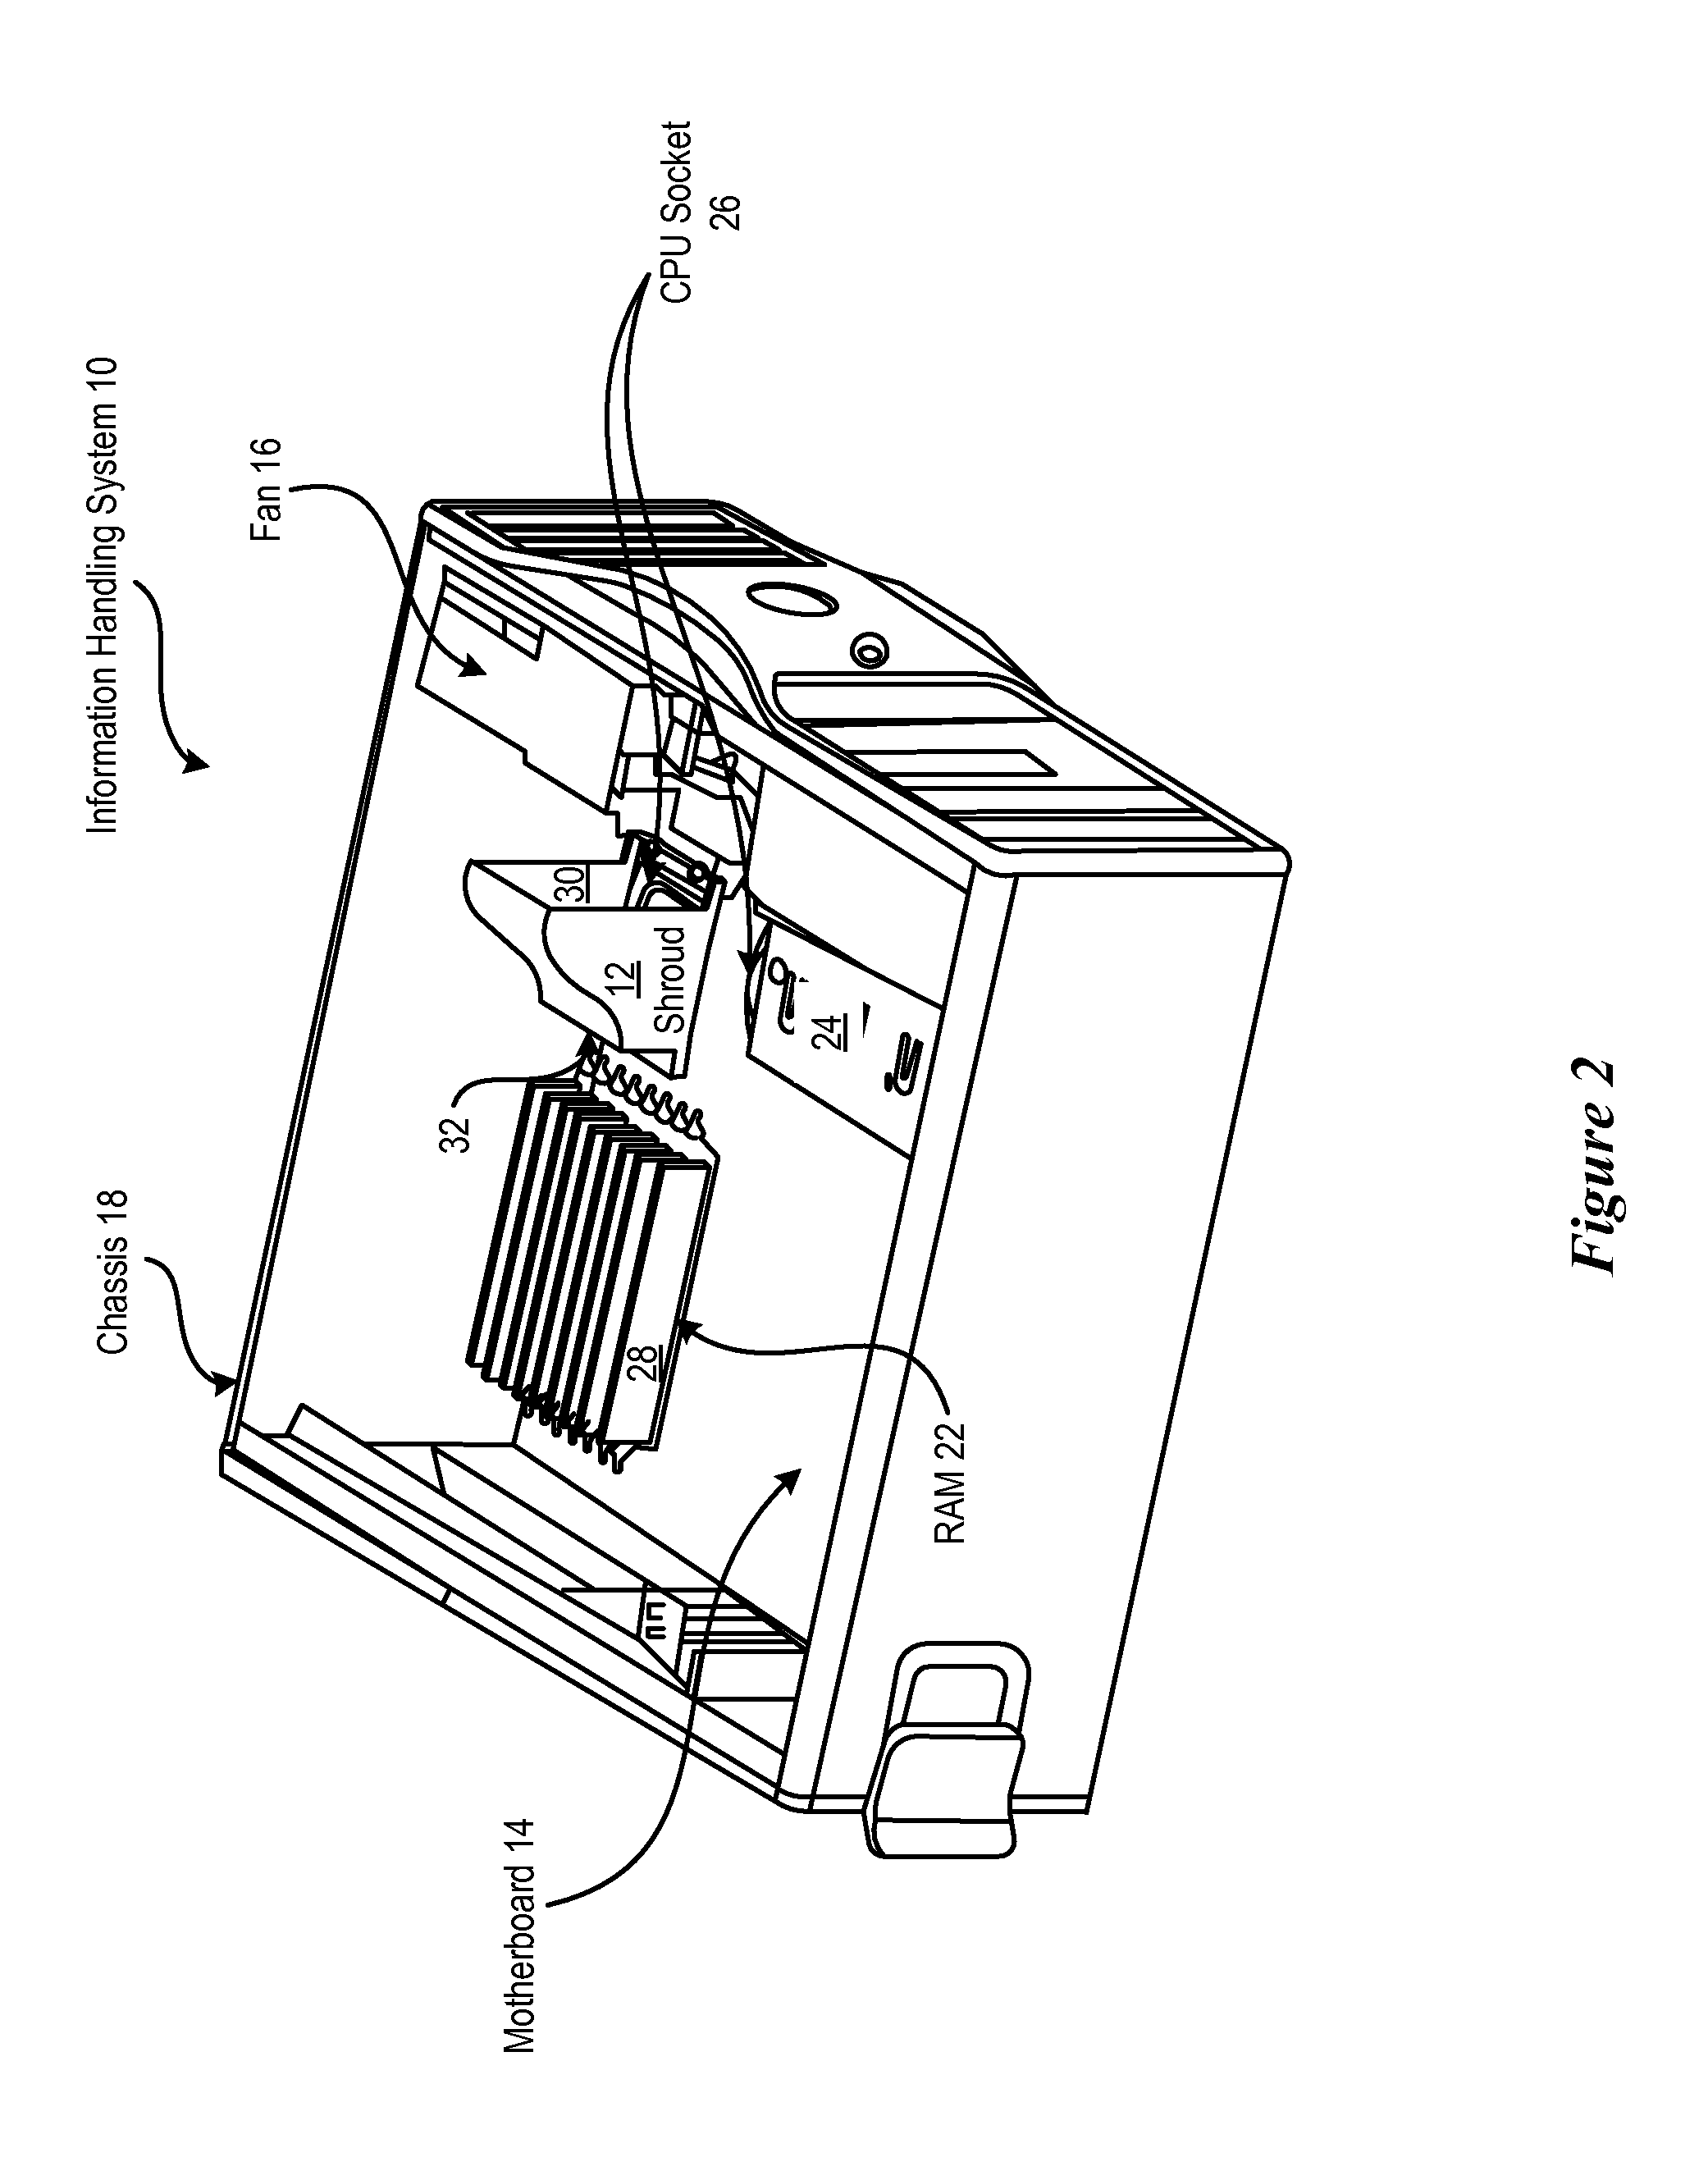 System and Method for Managing Cooling Airflow for a Multiprocessor Information Handling System